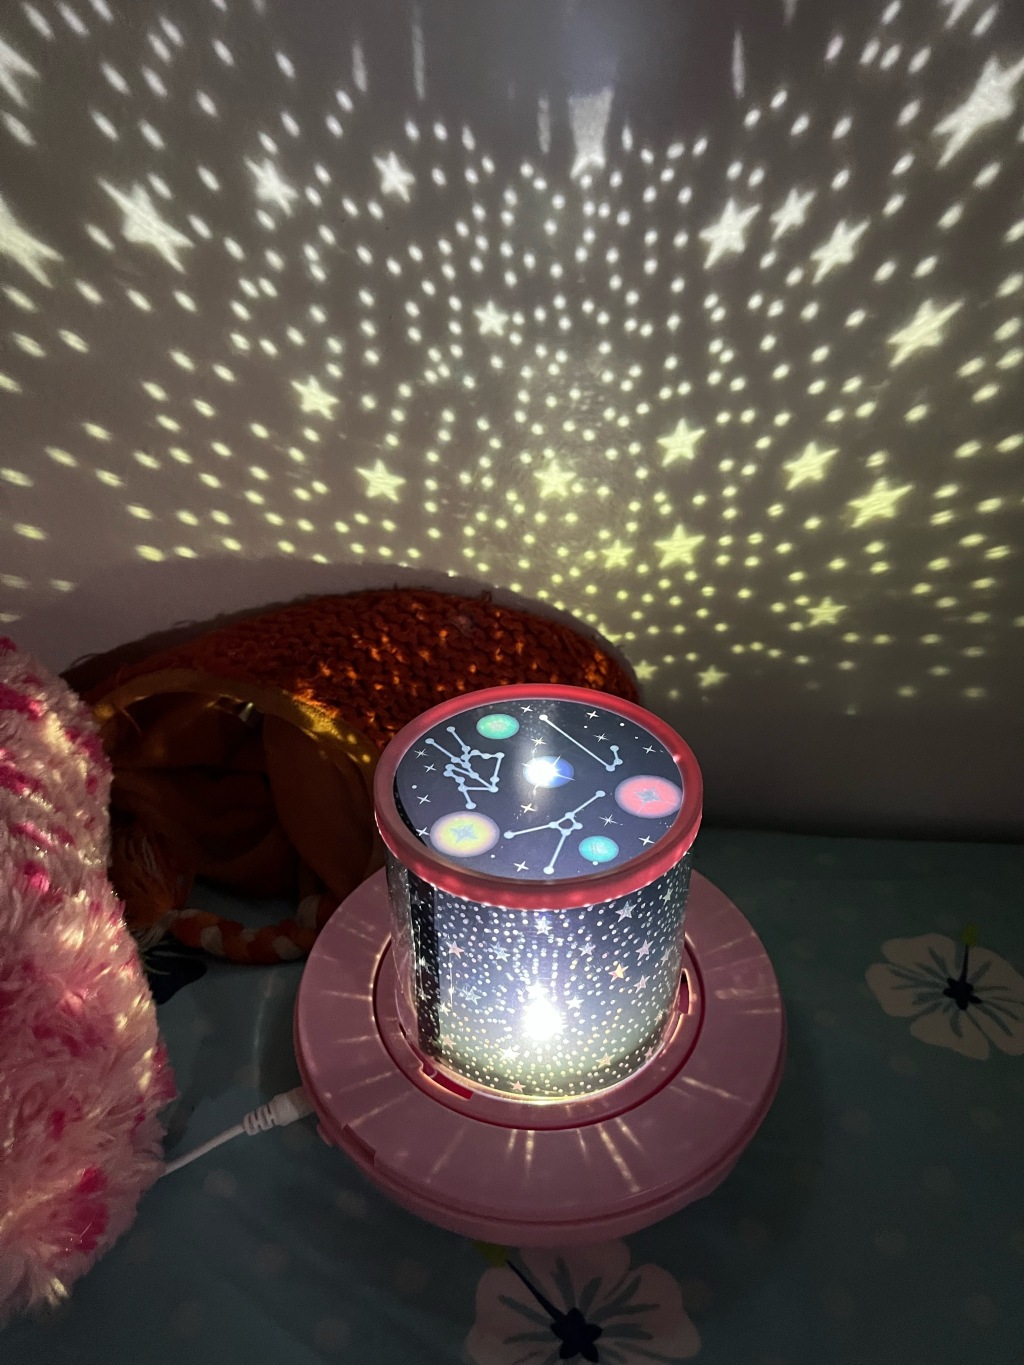 Star Night Light Projector for kids with constellations illuminating wall beside child's bed